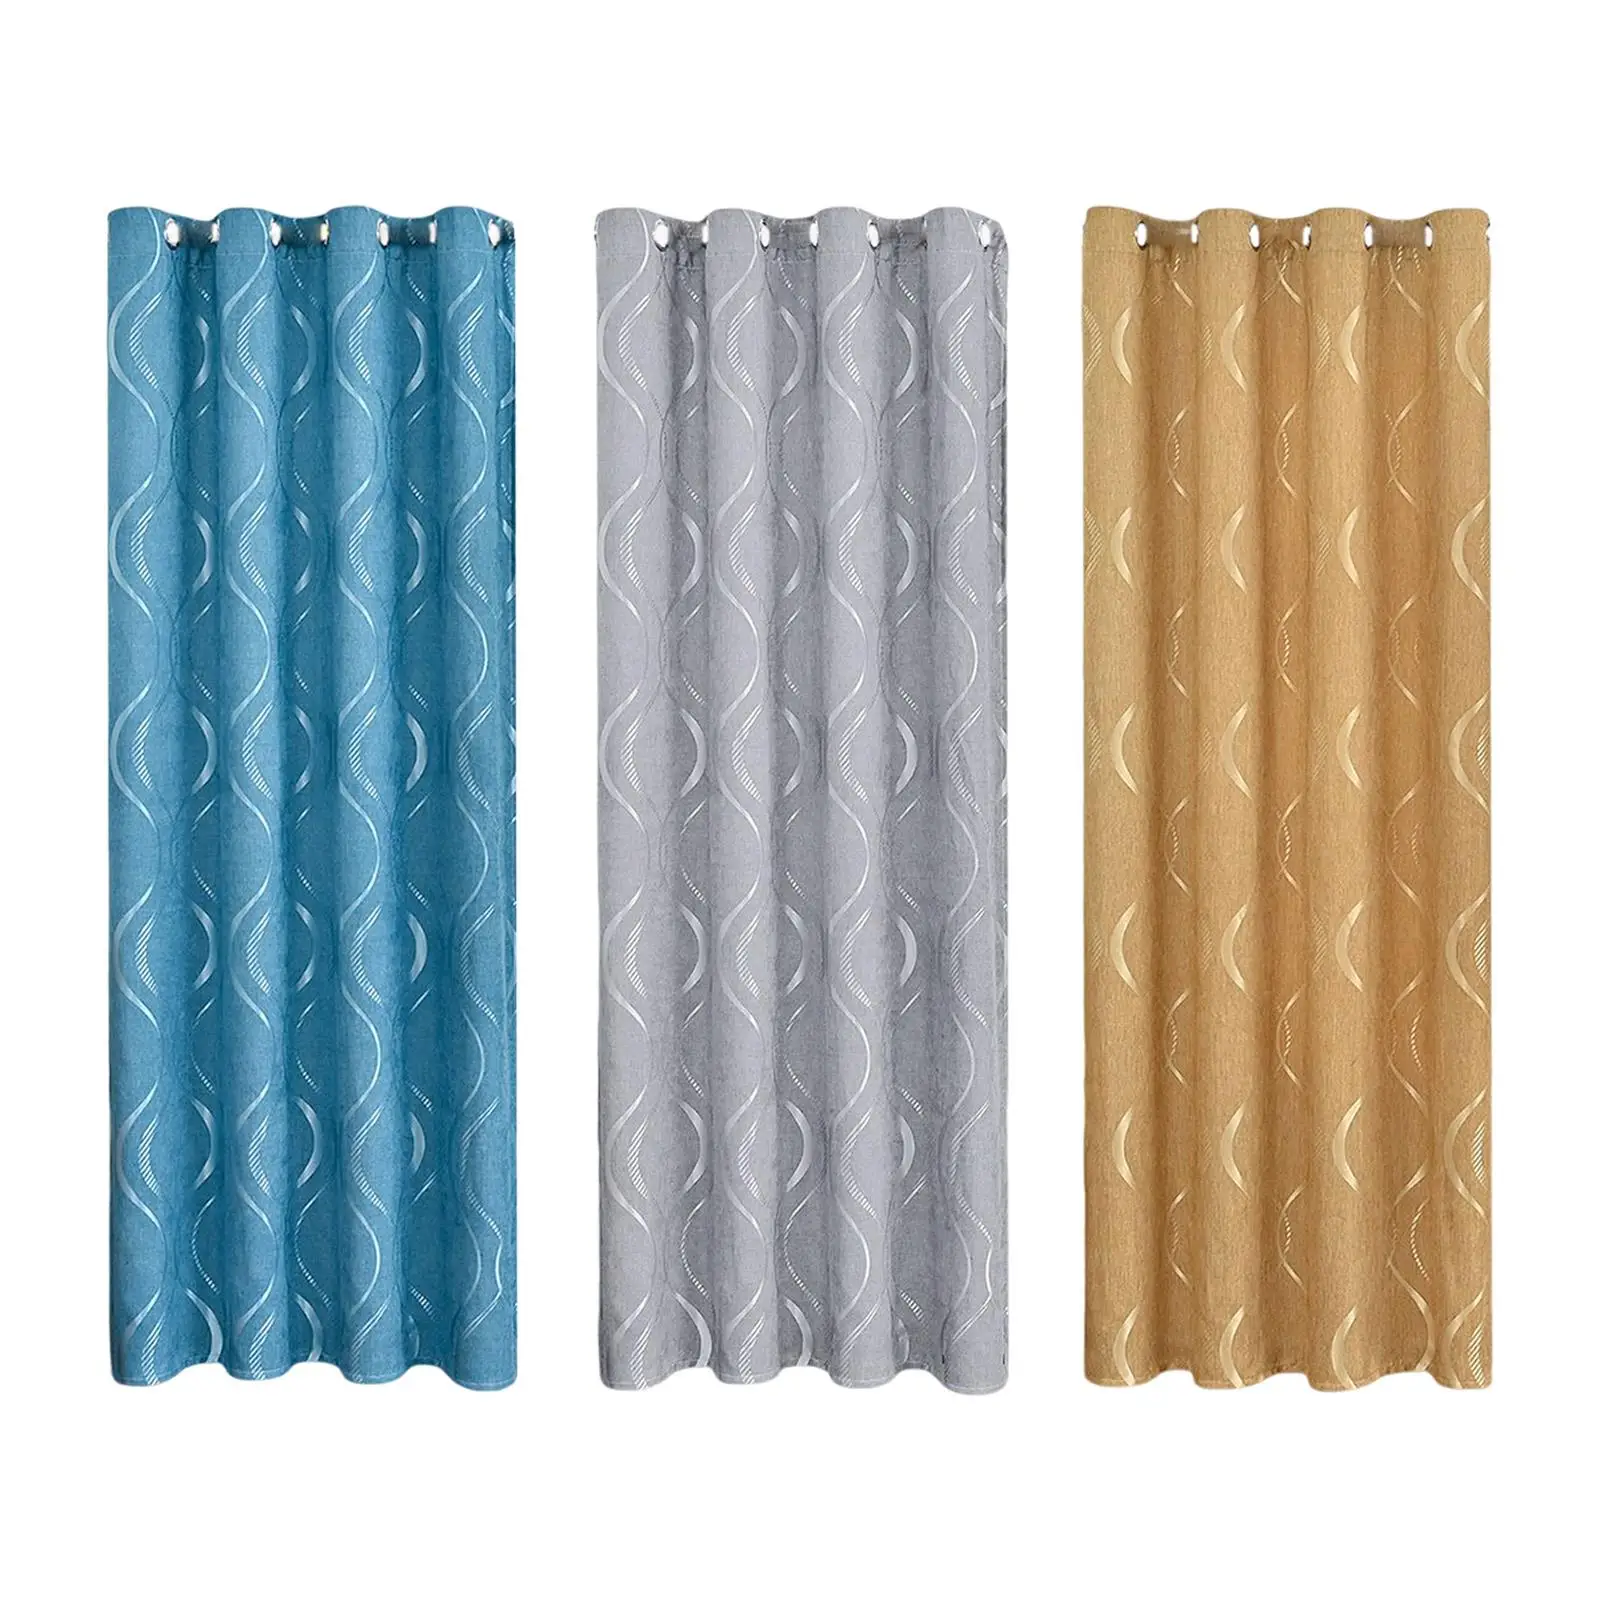 Household Window Curtains Machine Washable Elegant Decorative Window Draperies for Bedroom Home Living Room Decoration